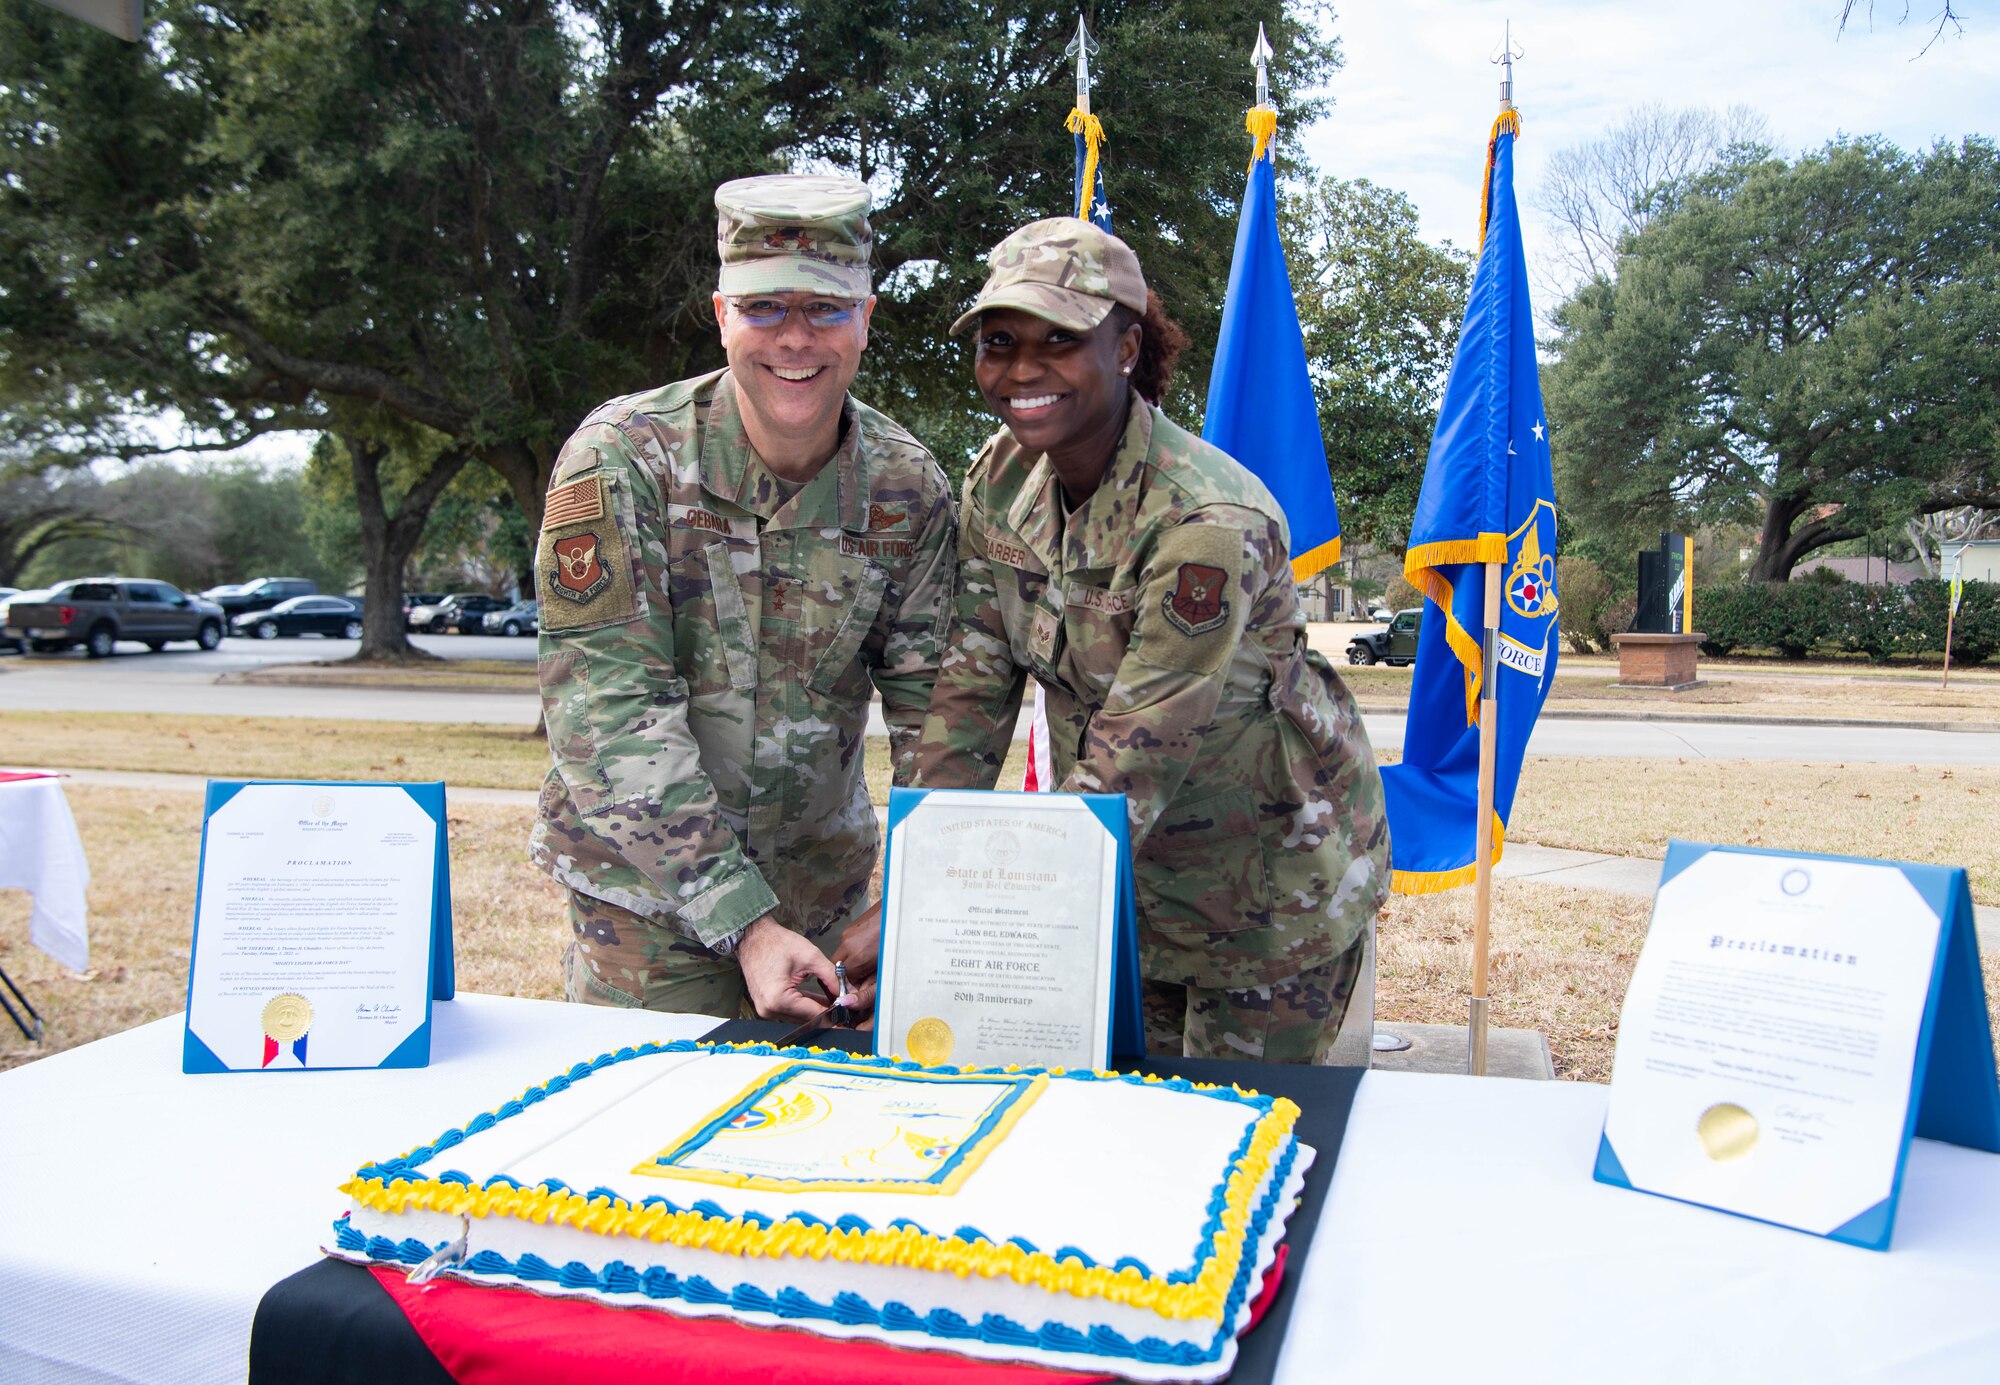 Maj. Gen. Andrew Gebara, 8th Air Force and Joint-Global Strike Operations Center commander, left, and Senior Airman Mikayla Barber, 8th Air Force commander support staff, take part in an Air Force tradition -- having the most senior and junior ranking member cut a cake during the 8th Air Force’s 80th anniversary celebration at Barksdale Air Force Base, La., February 1, 2022. Members from around 8th Air Force and the J-GSOC were in attendance to celebrate this momentous occasion. (U.S. Air Force photo by Staff Sgt. Bria Hughes)